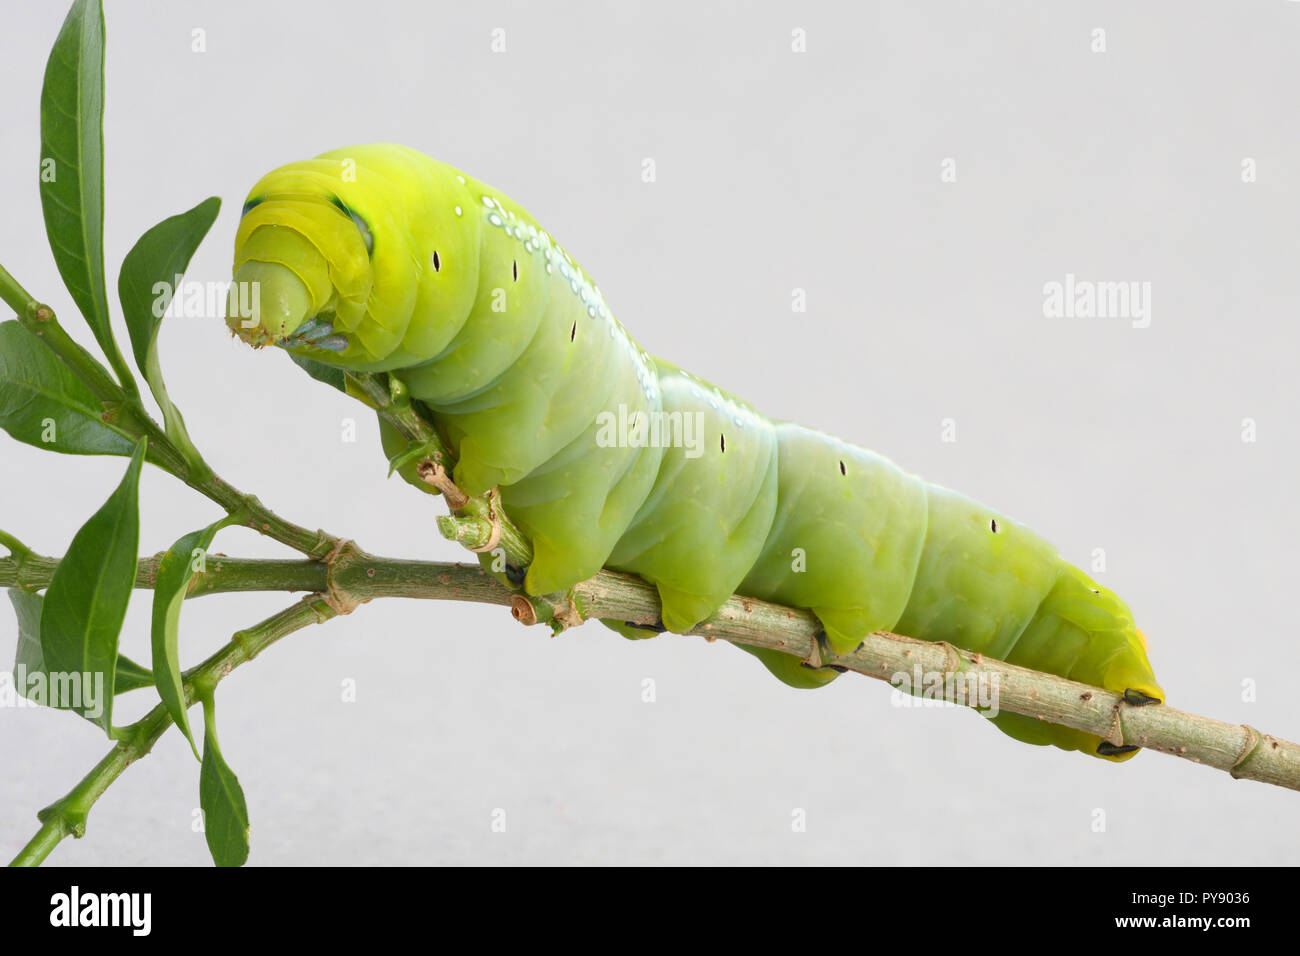 Green worm with leaves isolated on white Stock Photo